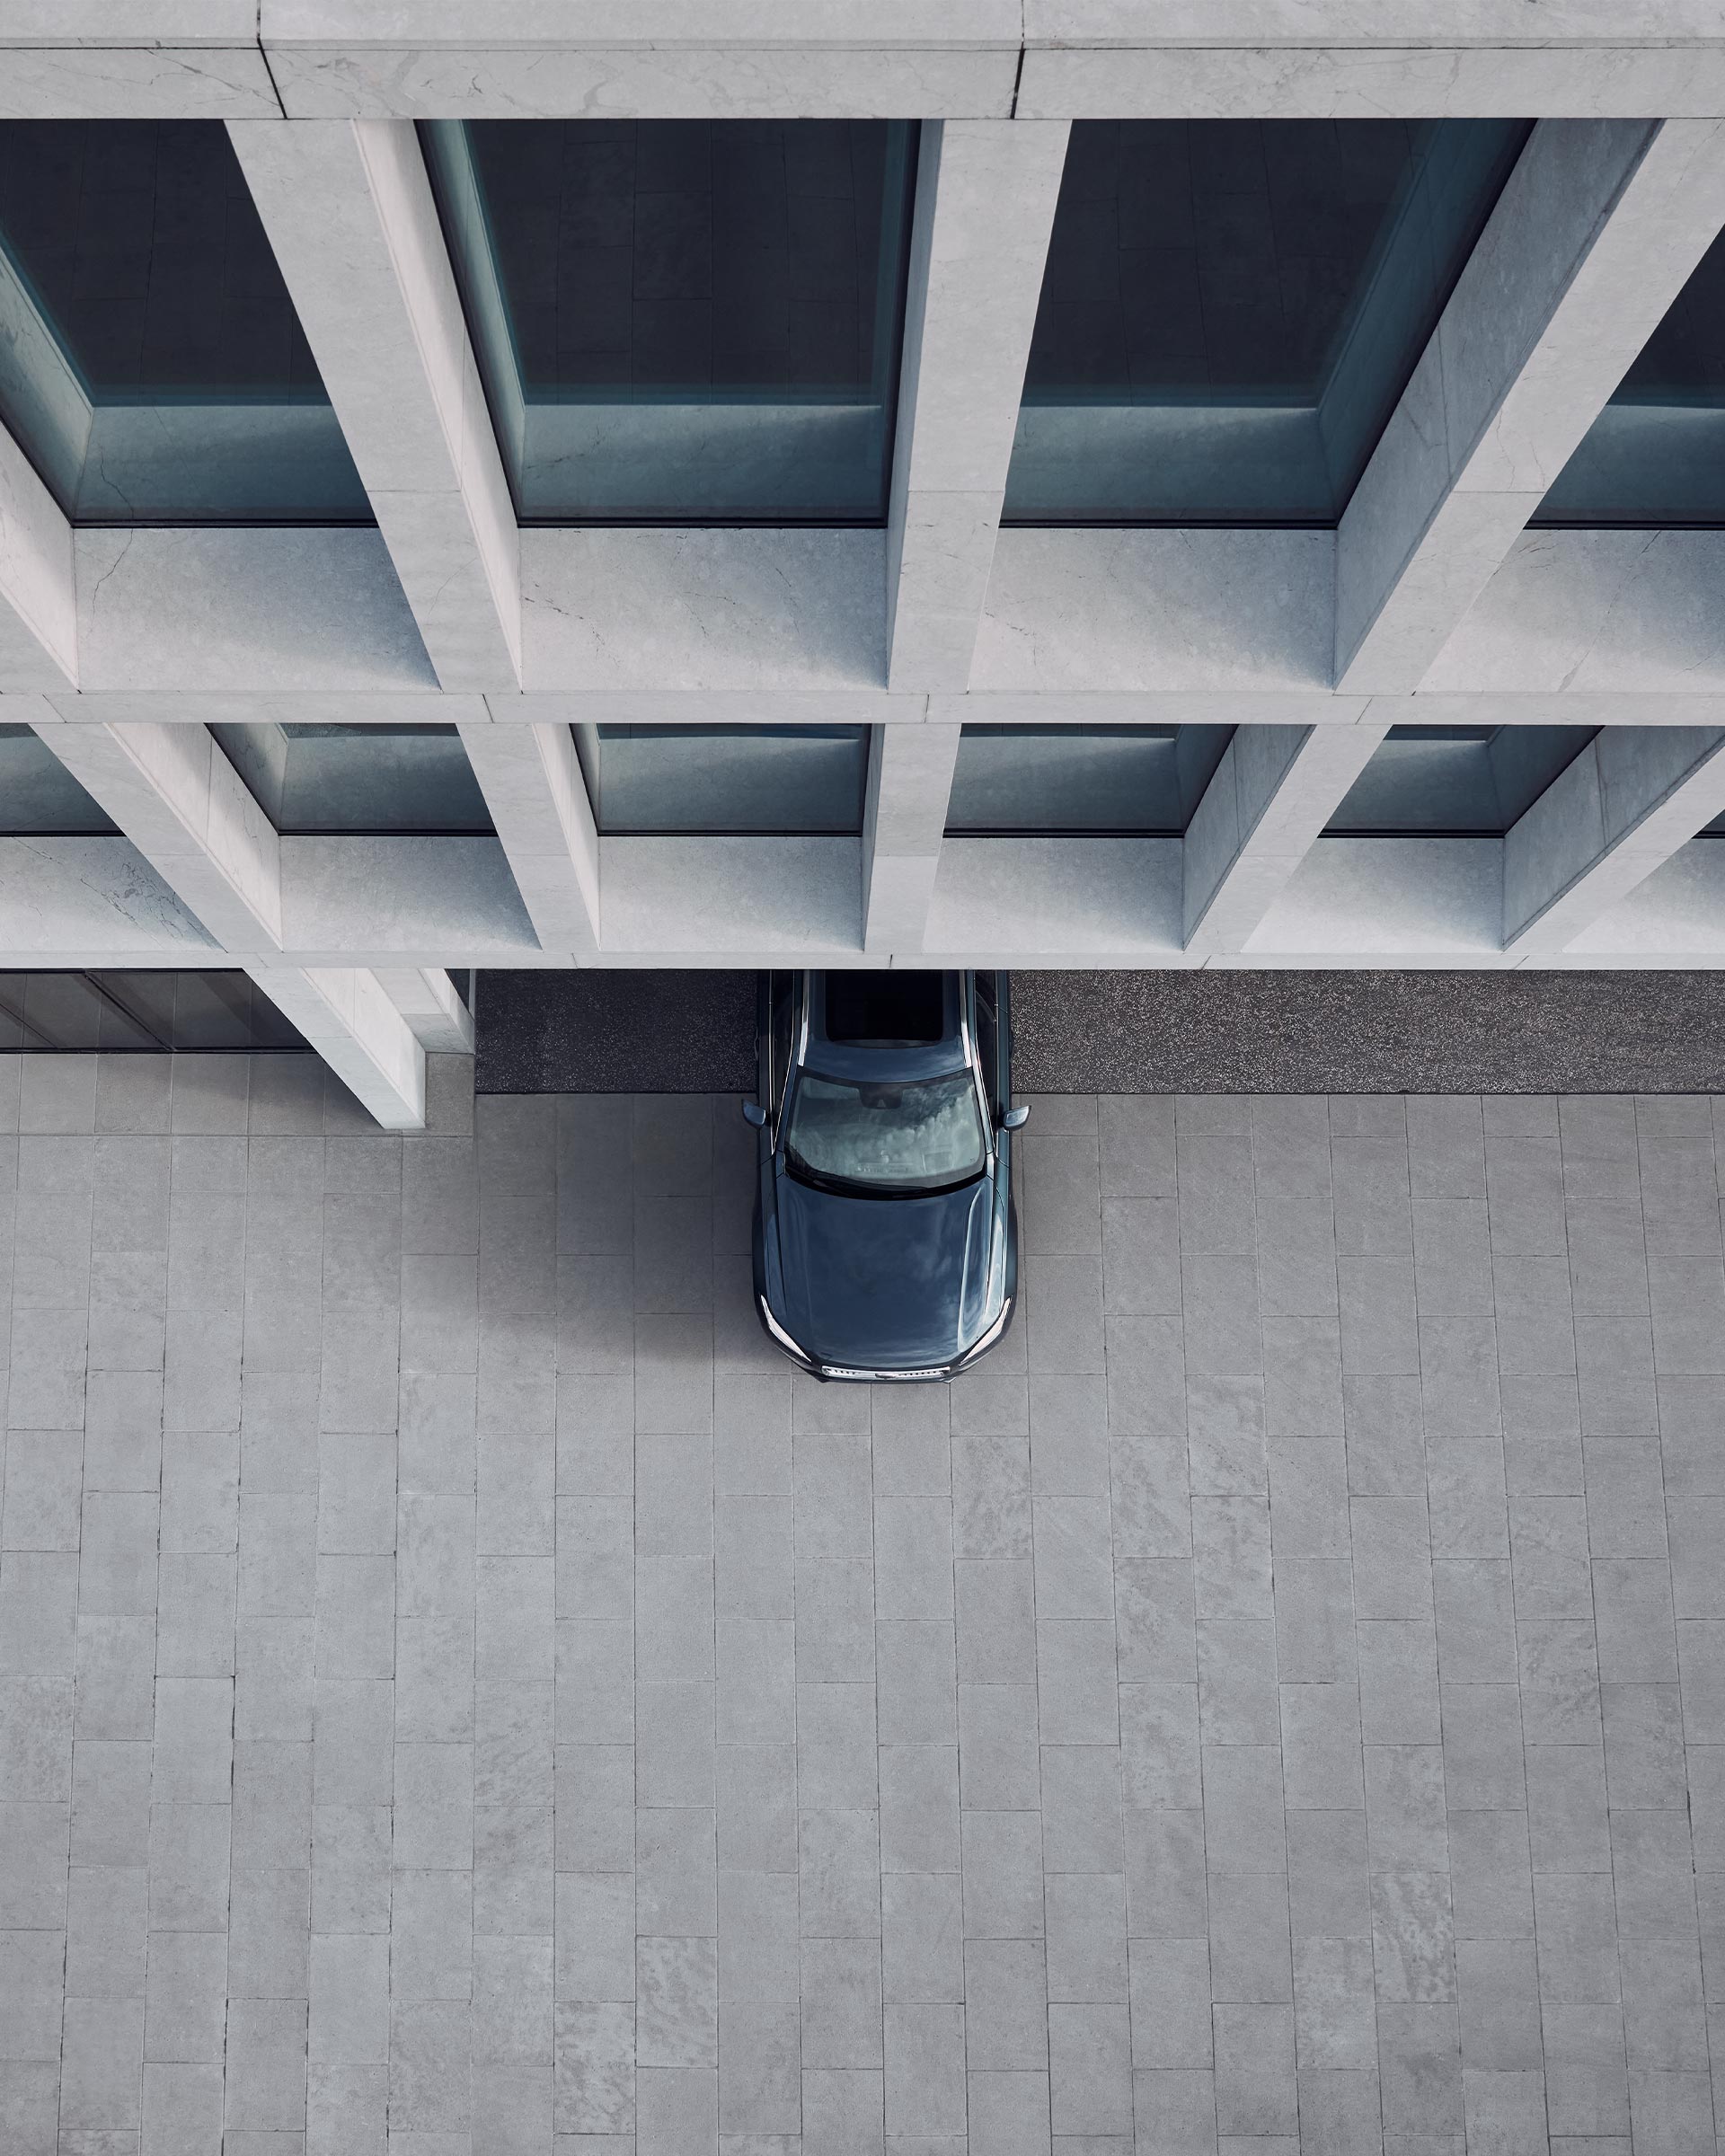 The sleek front half of the Volvo XC90 mild hybrid SUV viewed from above.